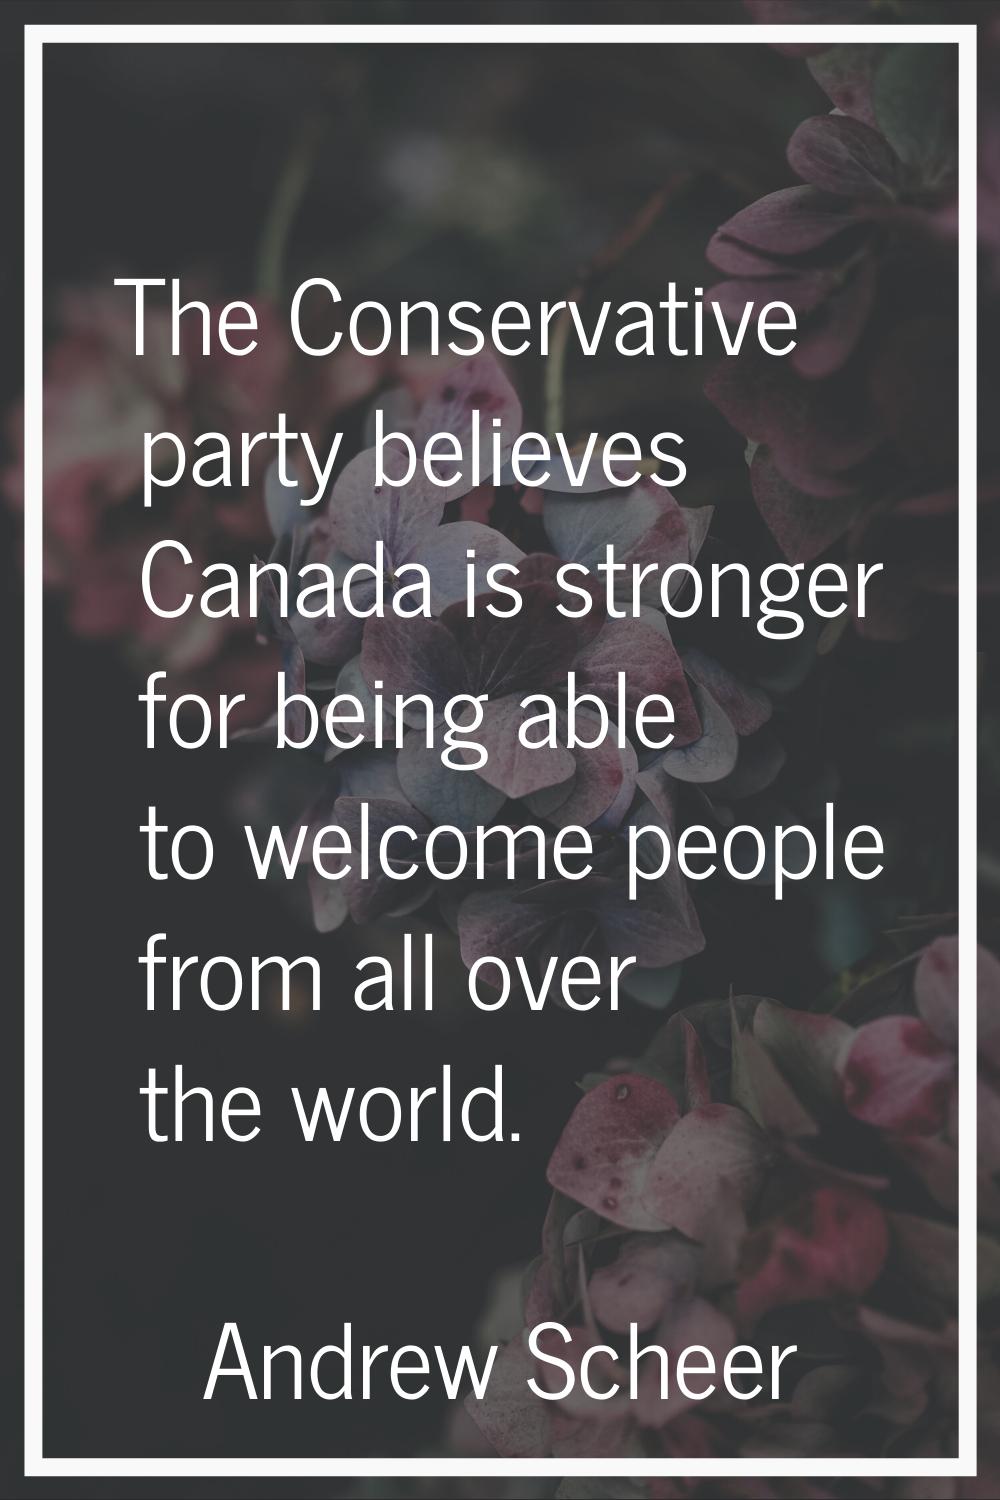 The Conservative party believes Canada is stronger for being able to welcome people from all over t